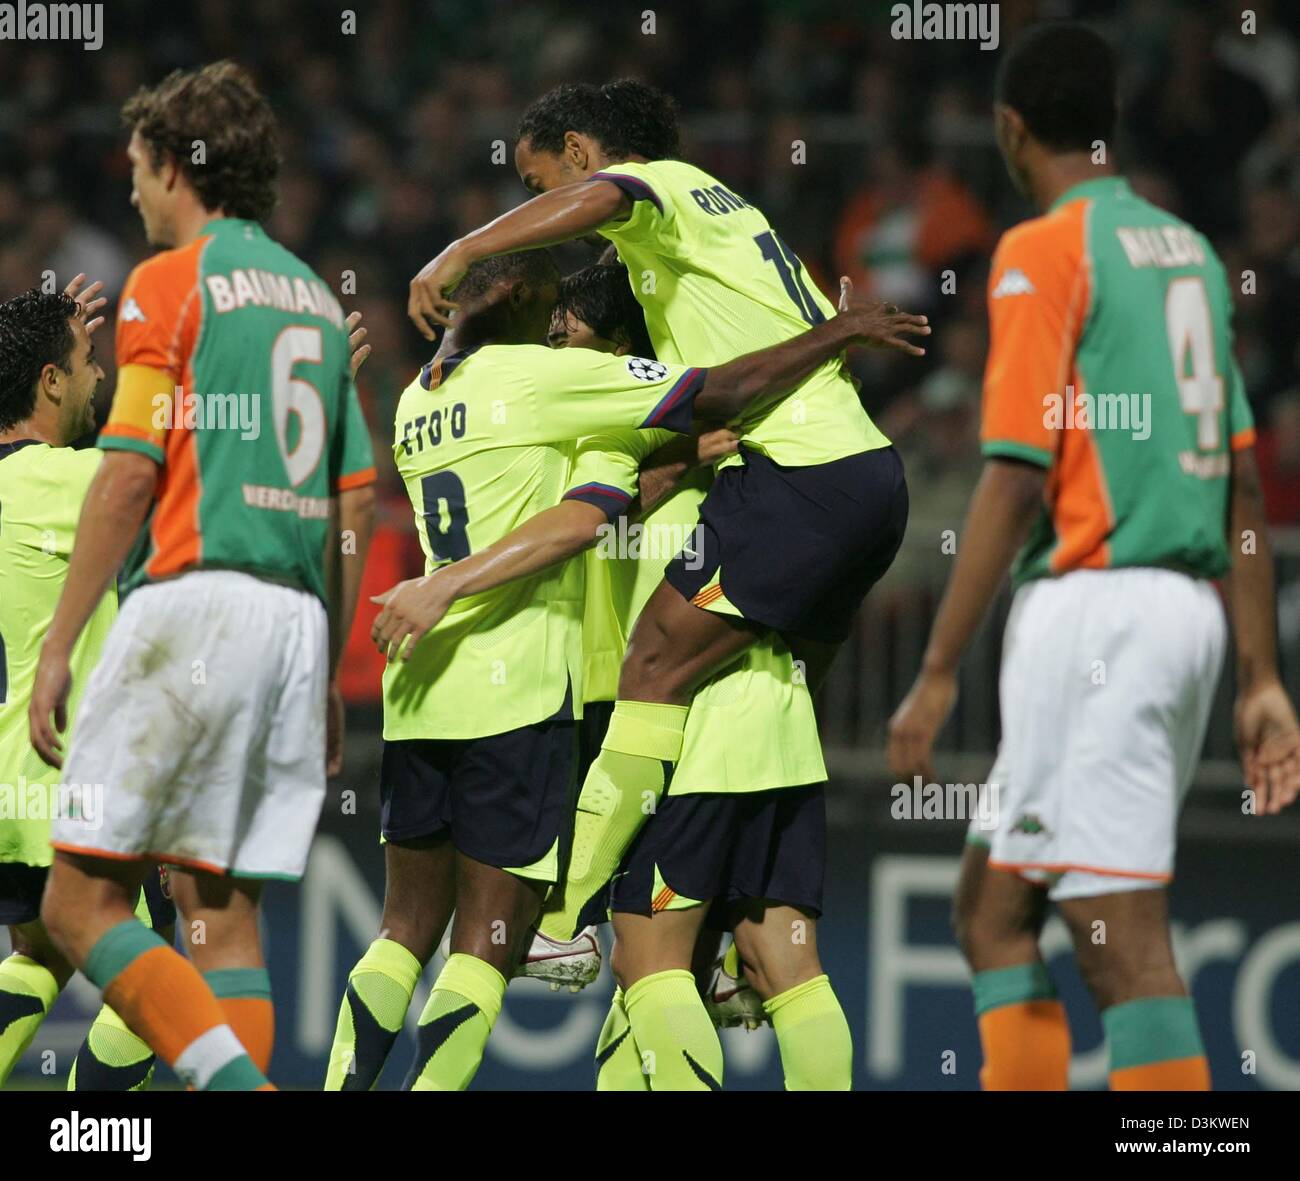 (dpa) - Players of Spanish soccer club FC Barcelona Samuel Eto'o (3rd from L) and Ronaldinho (2nd from R) congratulate their team mate Deco (C) after scoring 1-0 during the UEFA Champions League match SV Werder Bremen vs FC Barcelona at the Weser stadium in Bremen, Germany, Wednesday 14 September 2005. On the left Frank Baumann and on the right Naldo of Werder Bremen are pictured.  Stock Photo